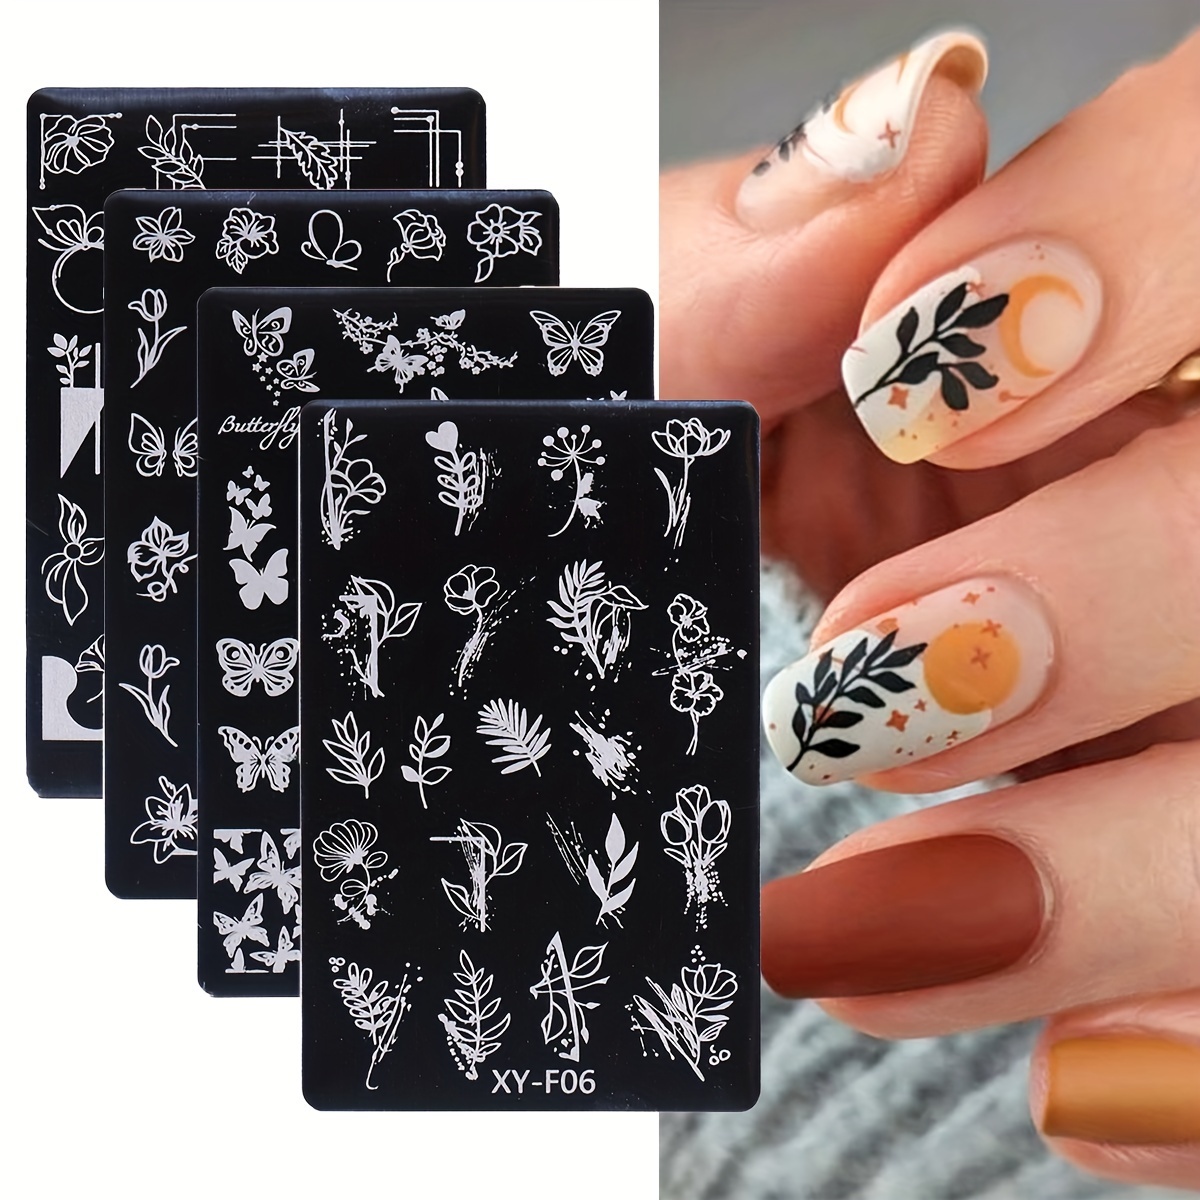 

4pcs/set Nail Stamping Plate Flowers Butterfly Leaf Image Design Nail Art Stamp Stencil Templates Nail Tools